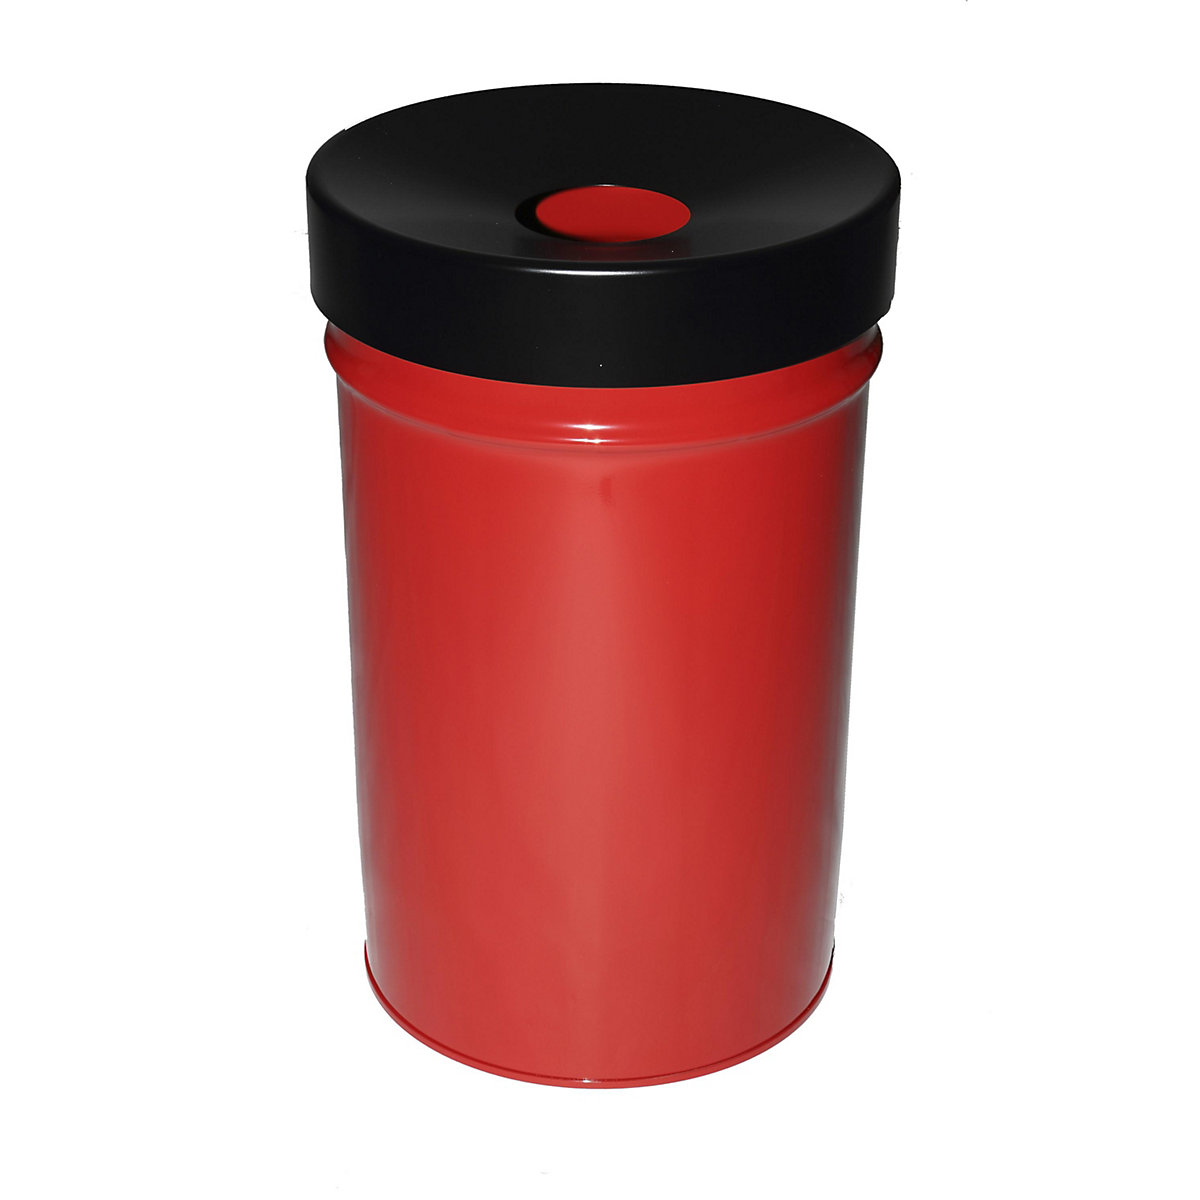 Waste collector, self extinguishing, capacity 60 l, HxØ 630 x 392 mm, red